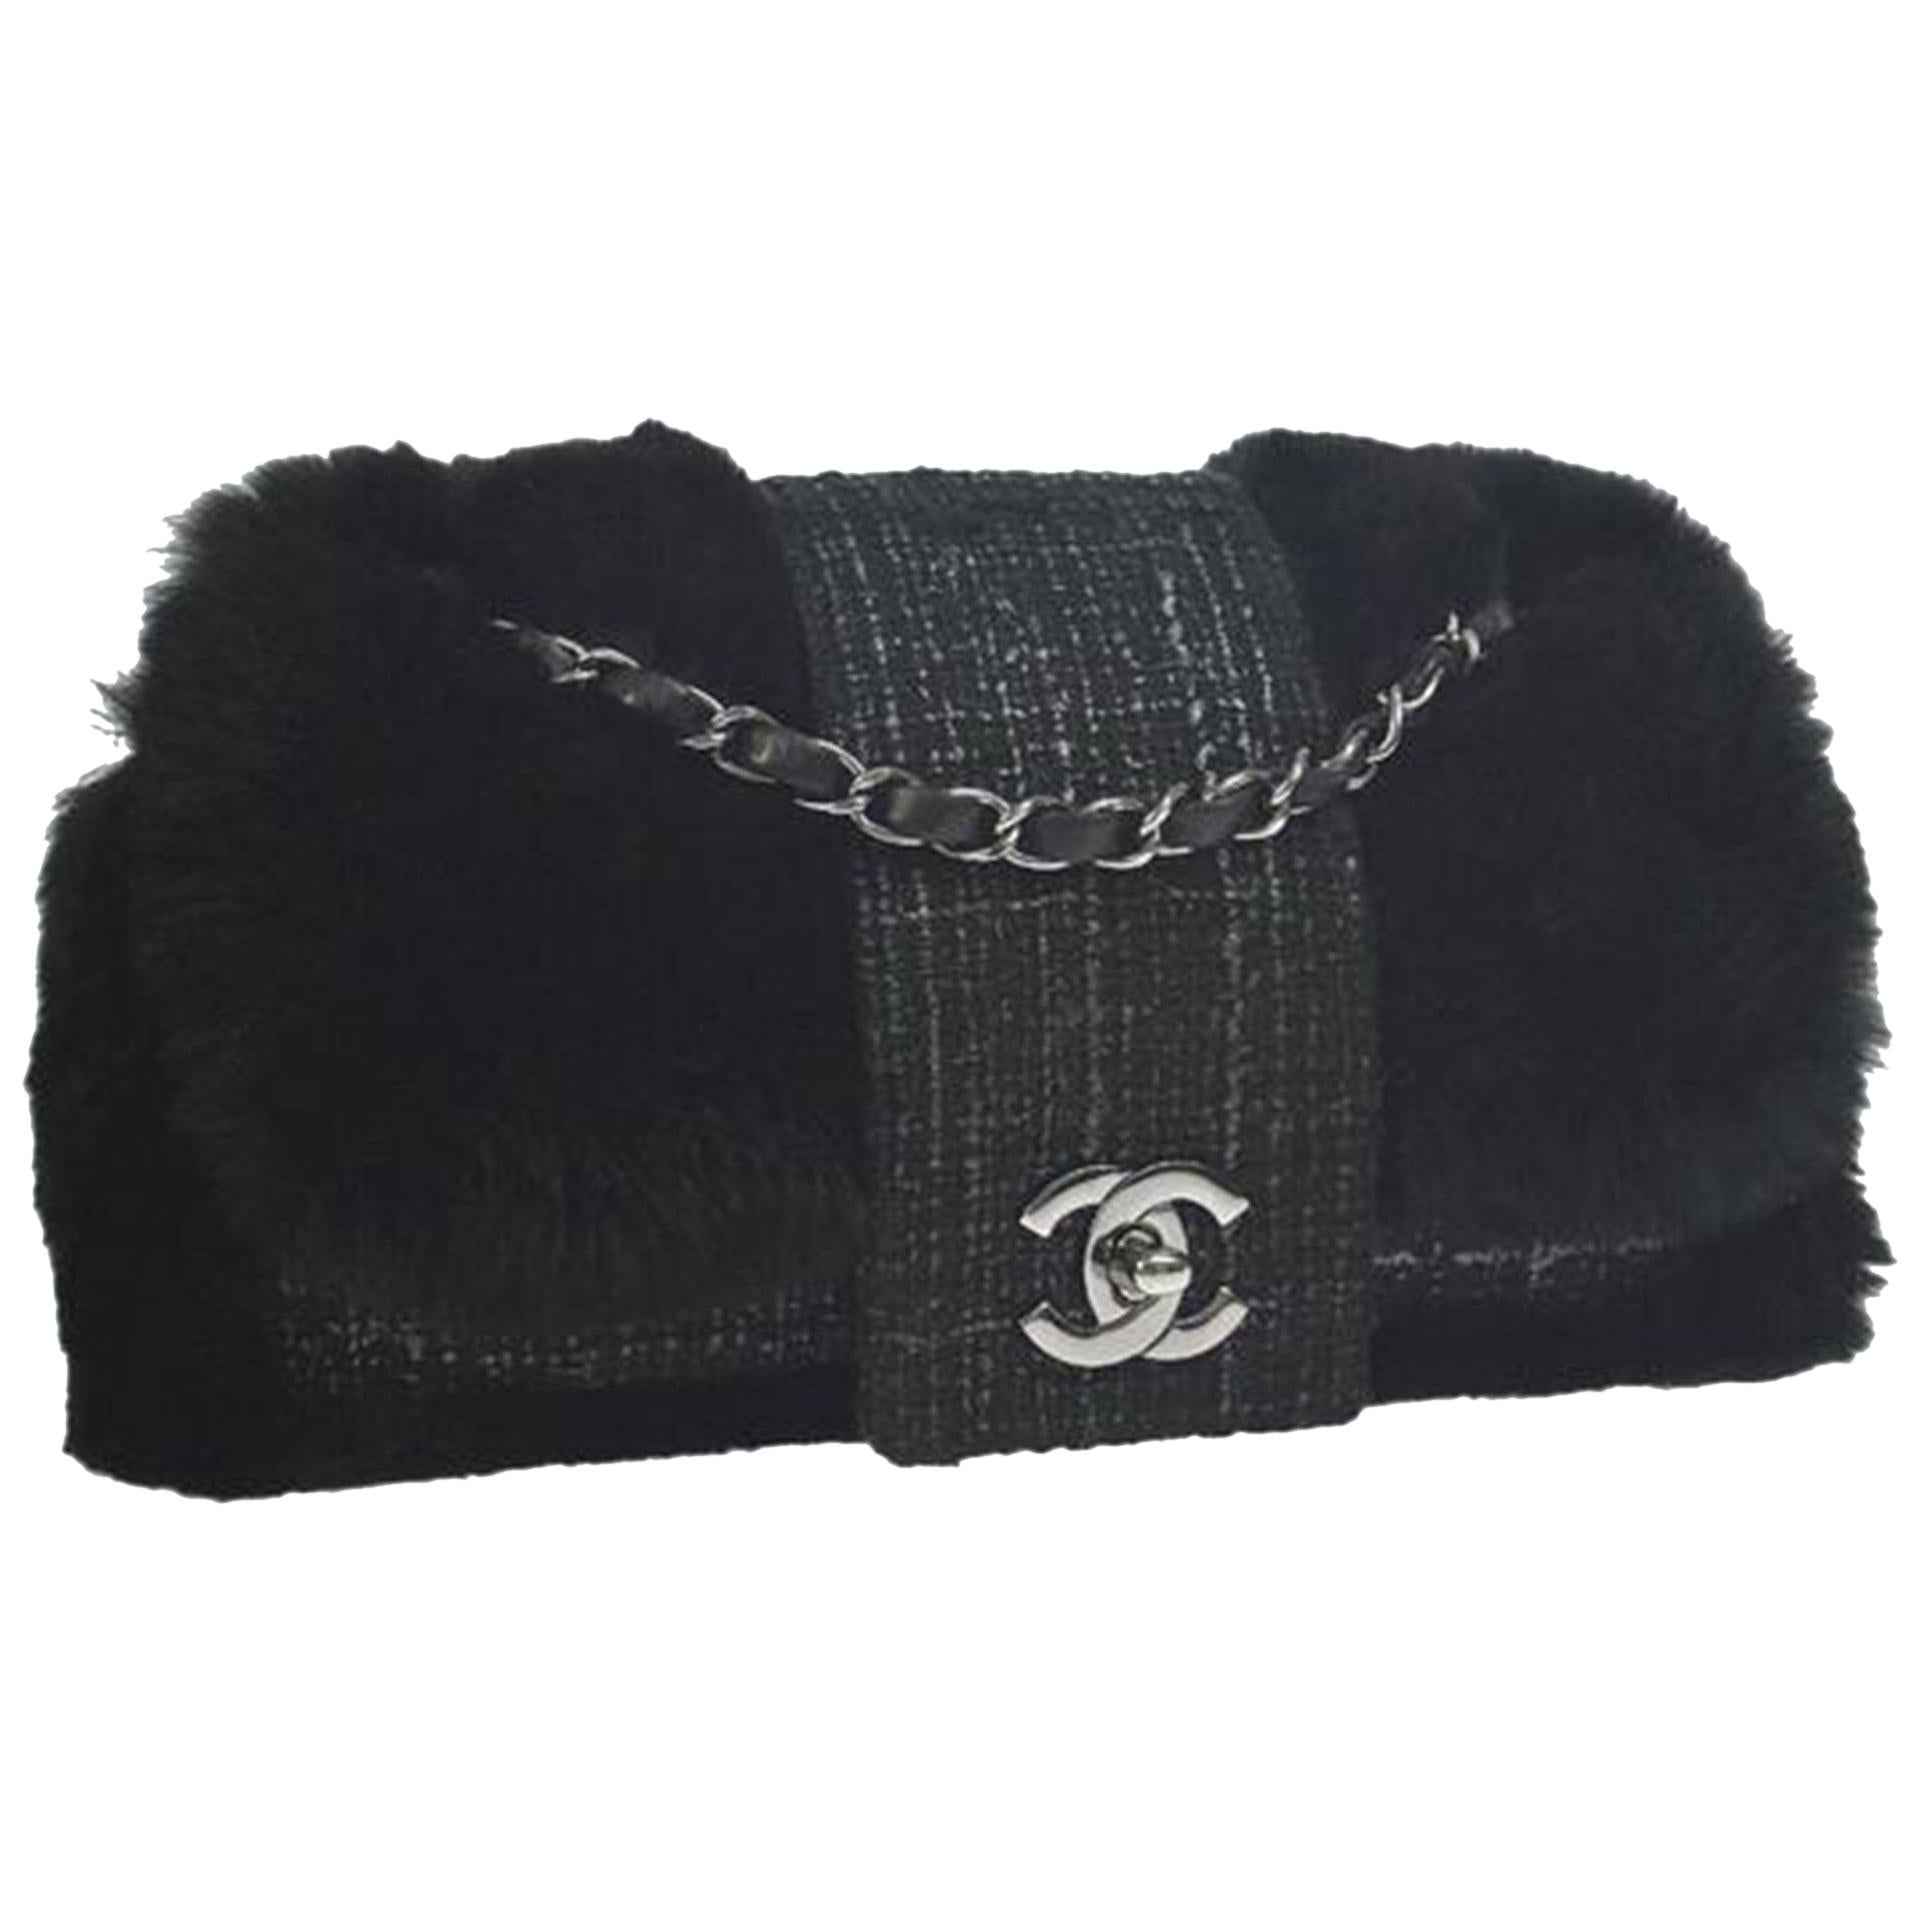 Chanel Classic Flap Rare Vintage Orylag Black and Grey Tweed Fur Cross Body Bag For Sale